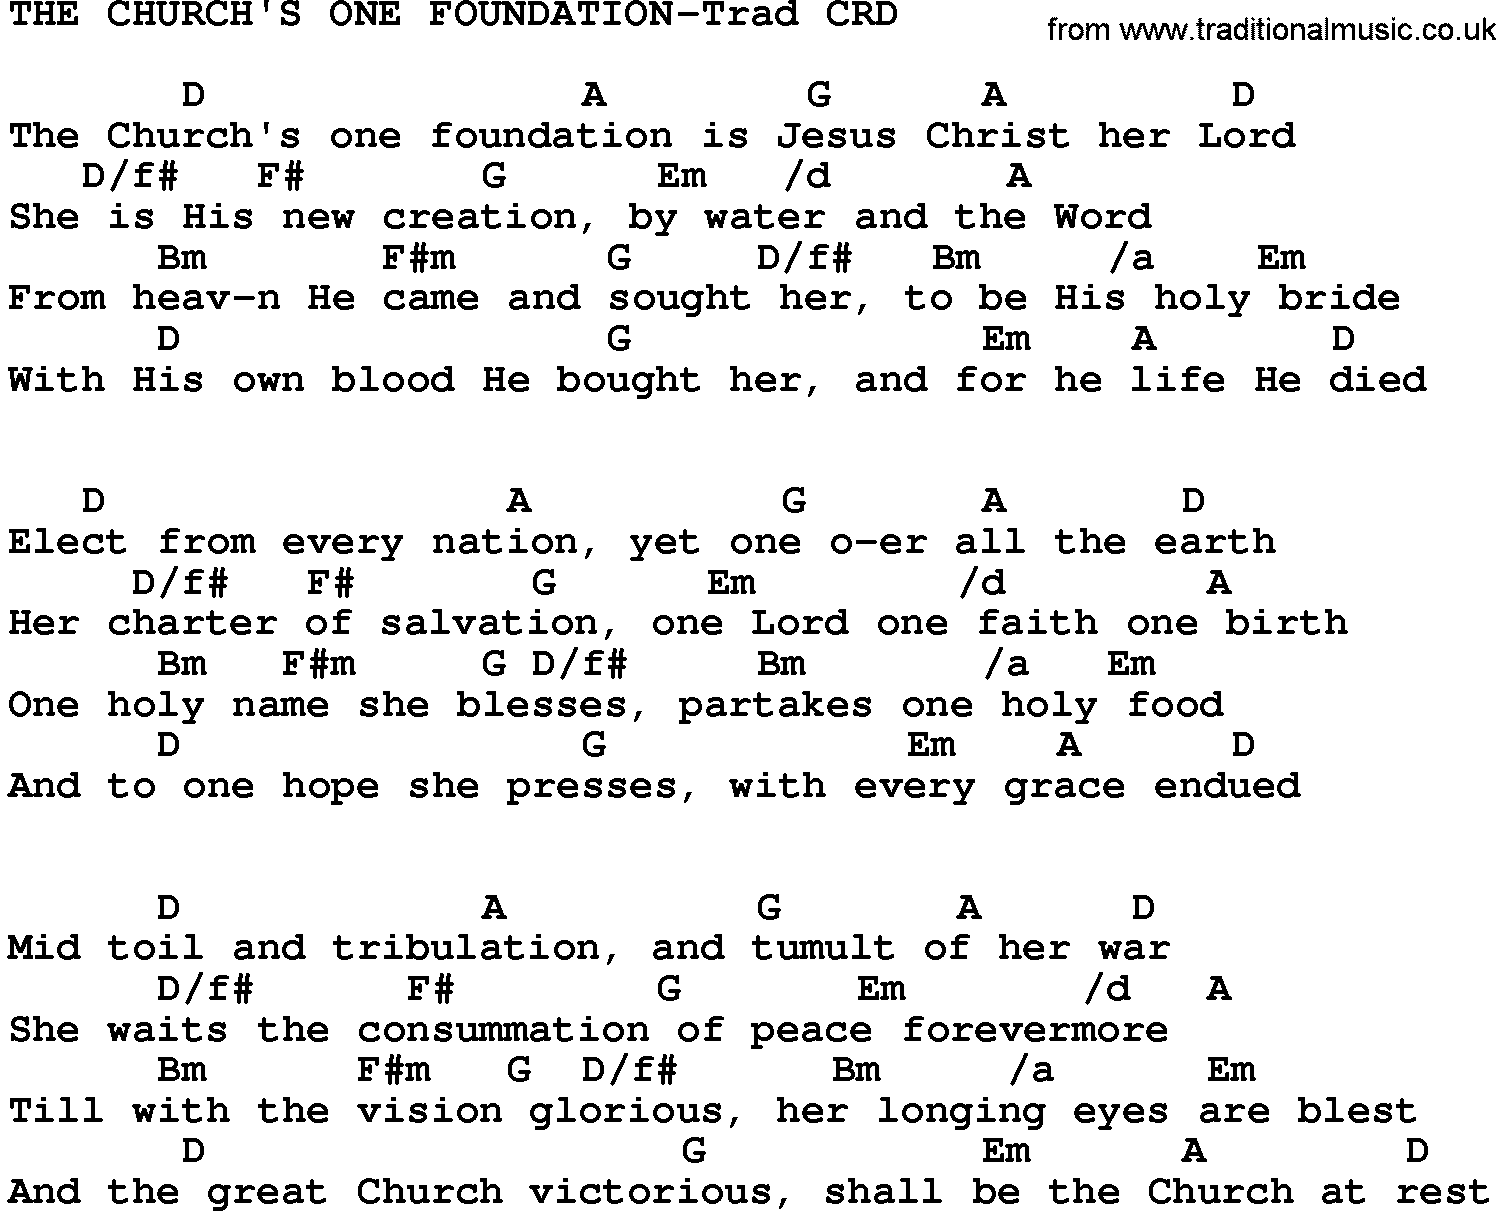 Gospel Song: The Church's One Foundation-Trad, lyrics and chords.